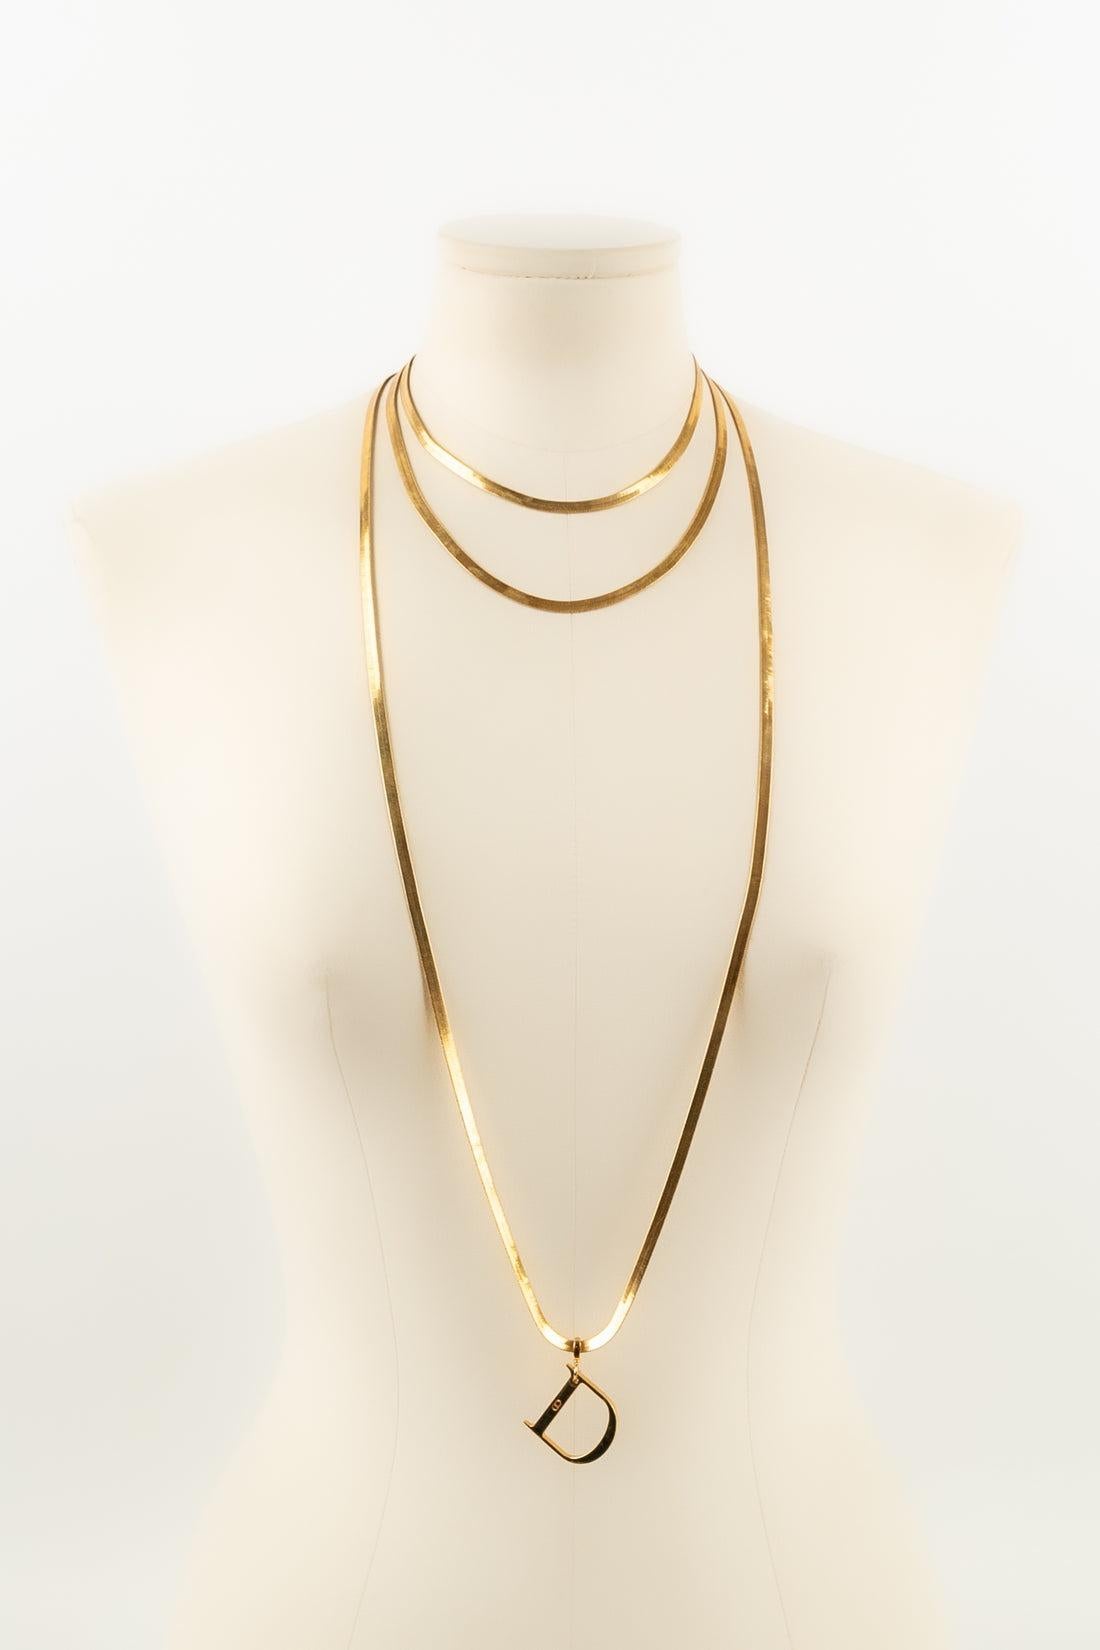 Dior - 3 chain rows necklace in gold-plated metal.

Additional information:
Condition: Very good condition
Dimensions: Length of the shorter row: 37 cm to 41 cm

Seller Reference: BC194